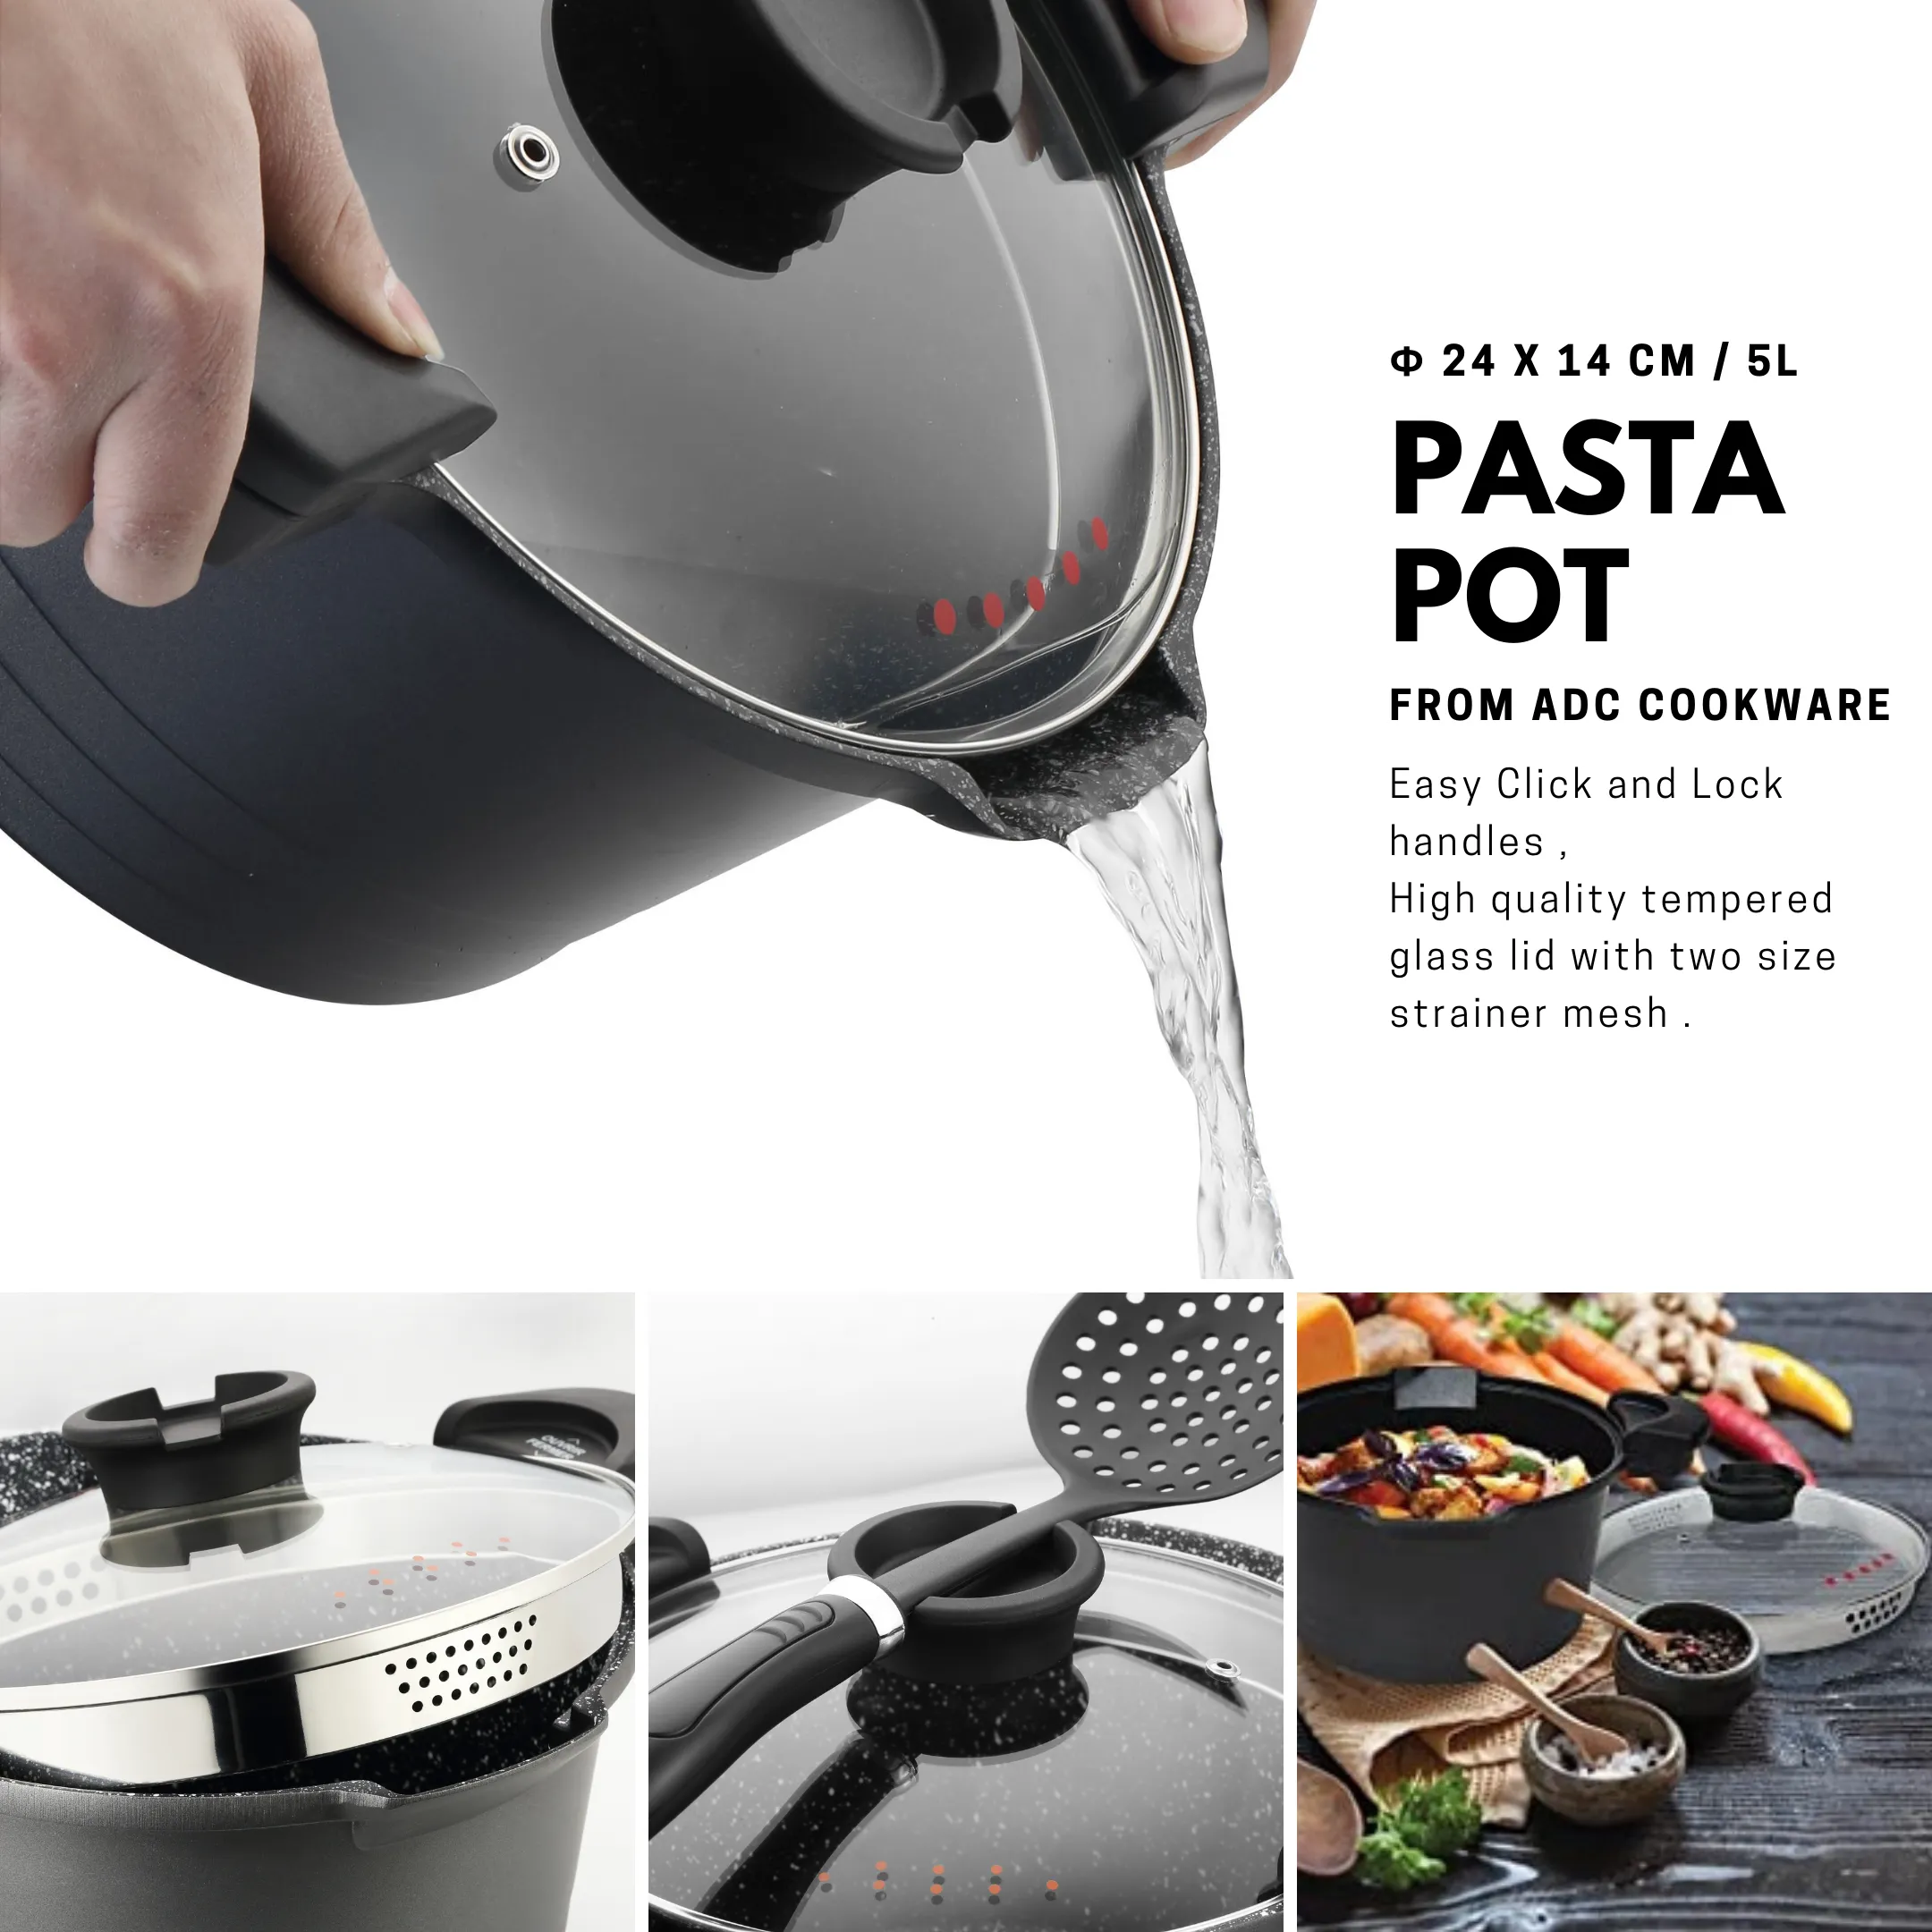 New Pasta Pot Innovation From ADC Cookware